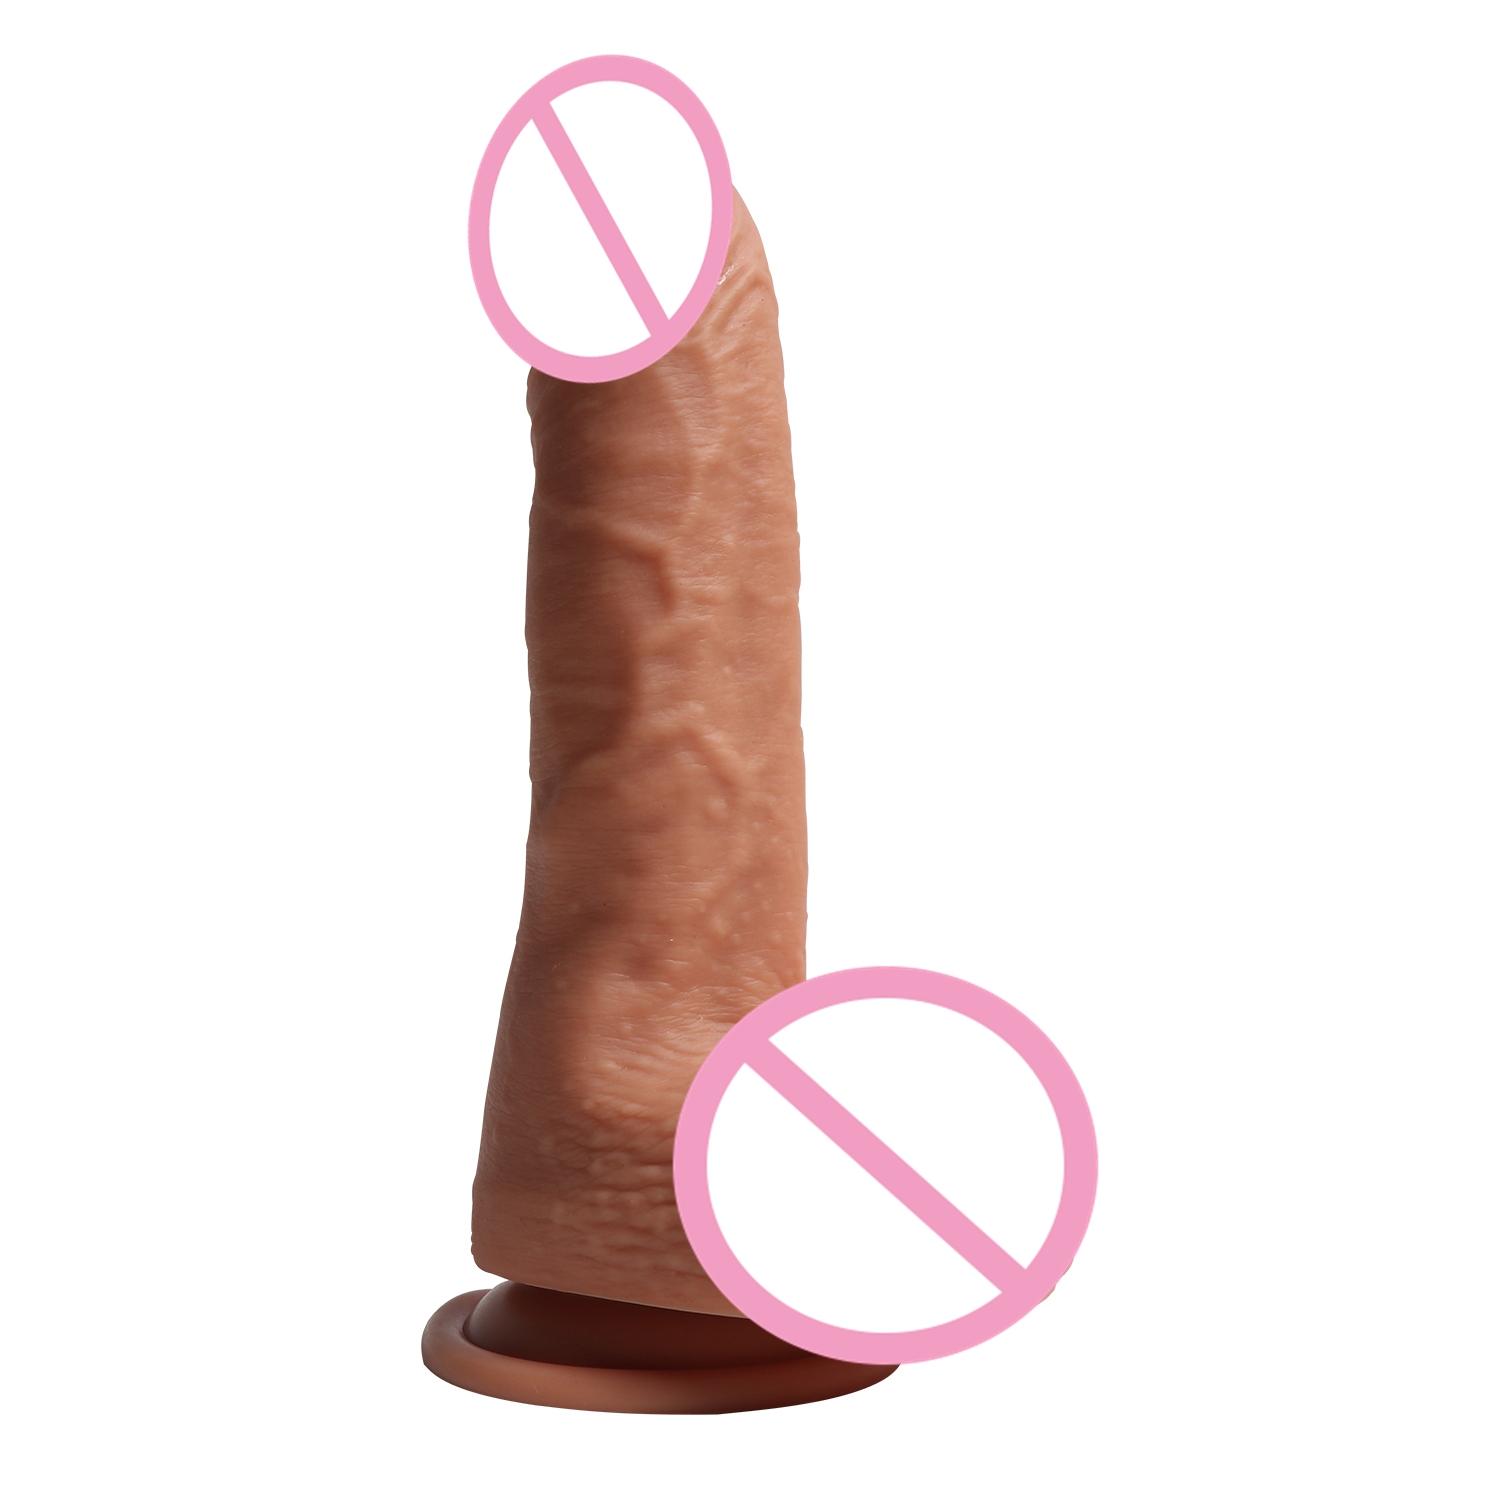  Sex Dildo Adult Toys Strong Big Long Dildo For Male Tan 8inch Suction Cup Hands Free Replacement Real Men Porn Dual Dildo